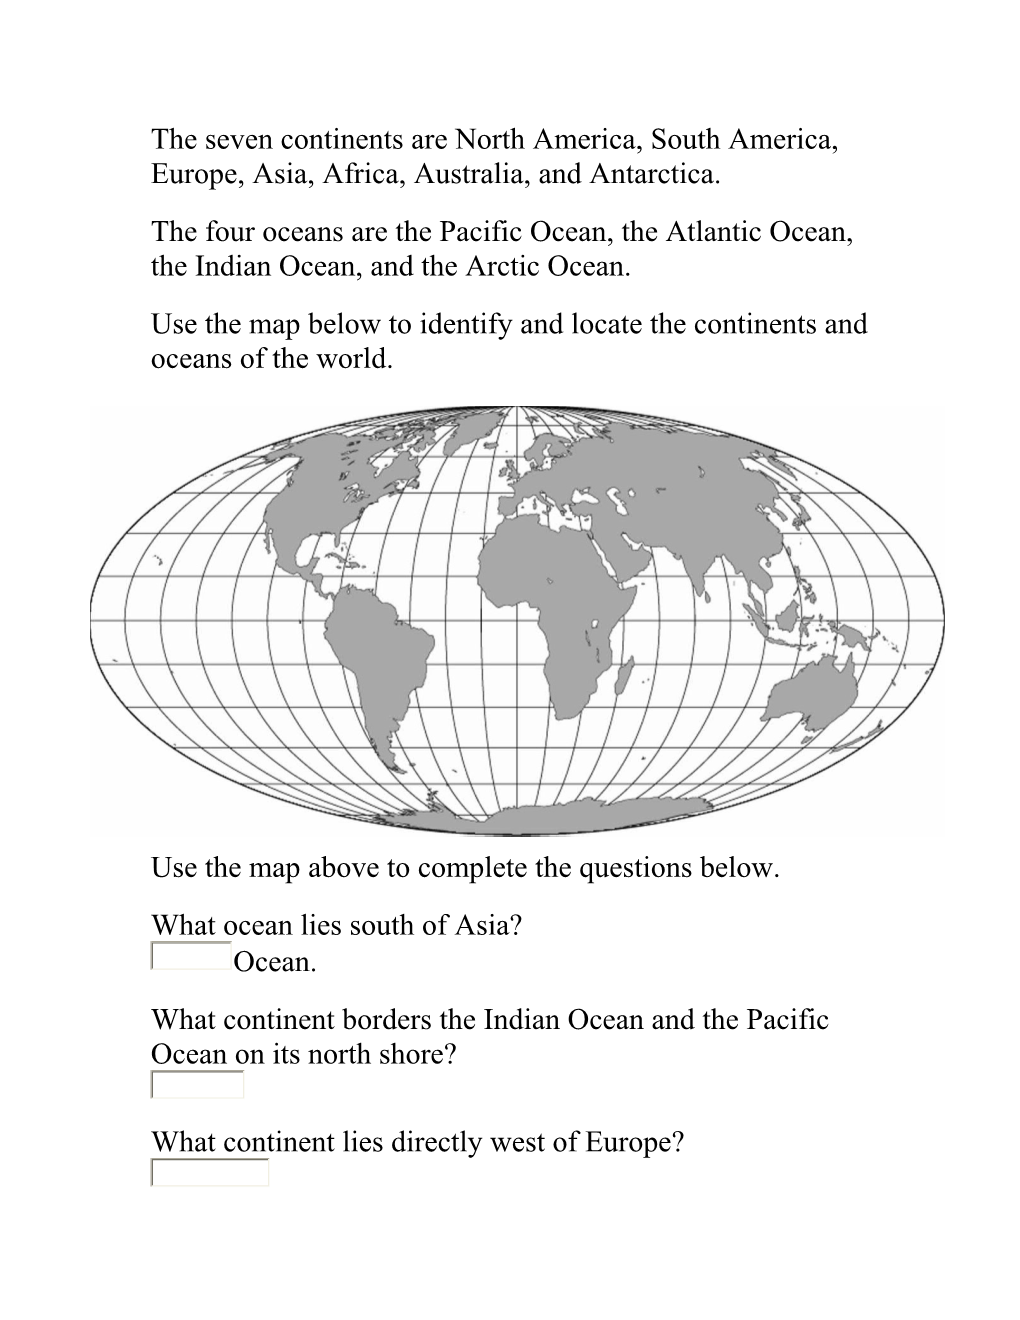 The Seven Continents Are North America, South America, Europe, Asia, Africa, Australia, And Antarctica